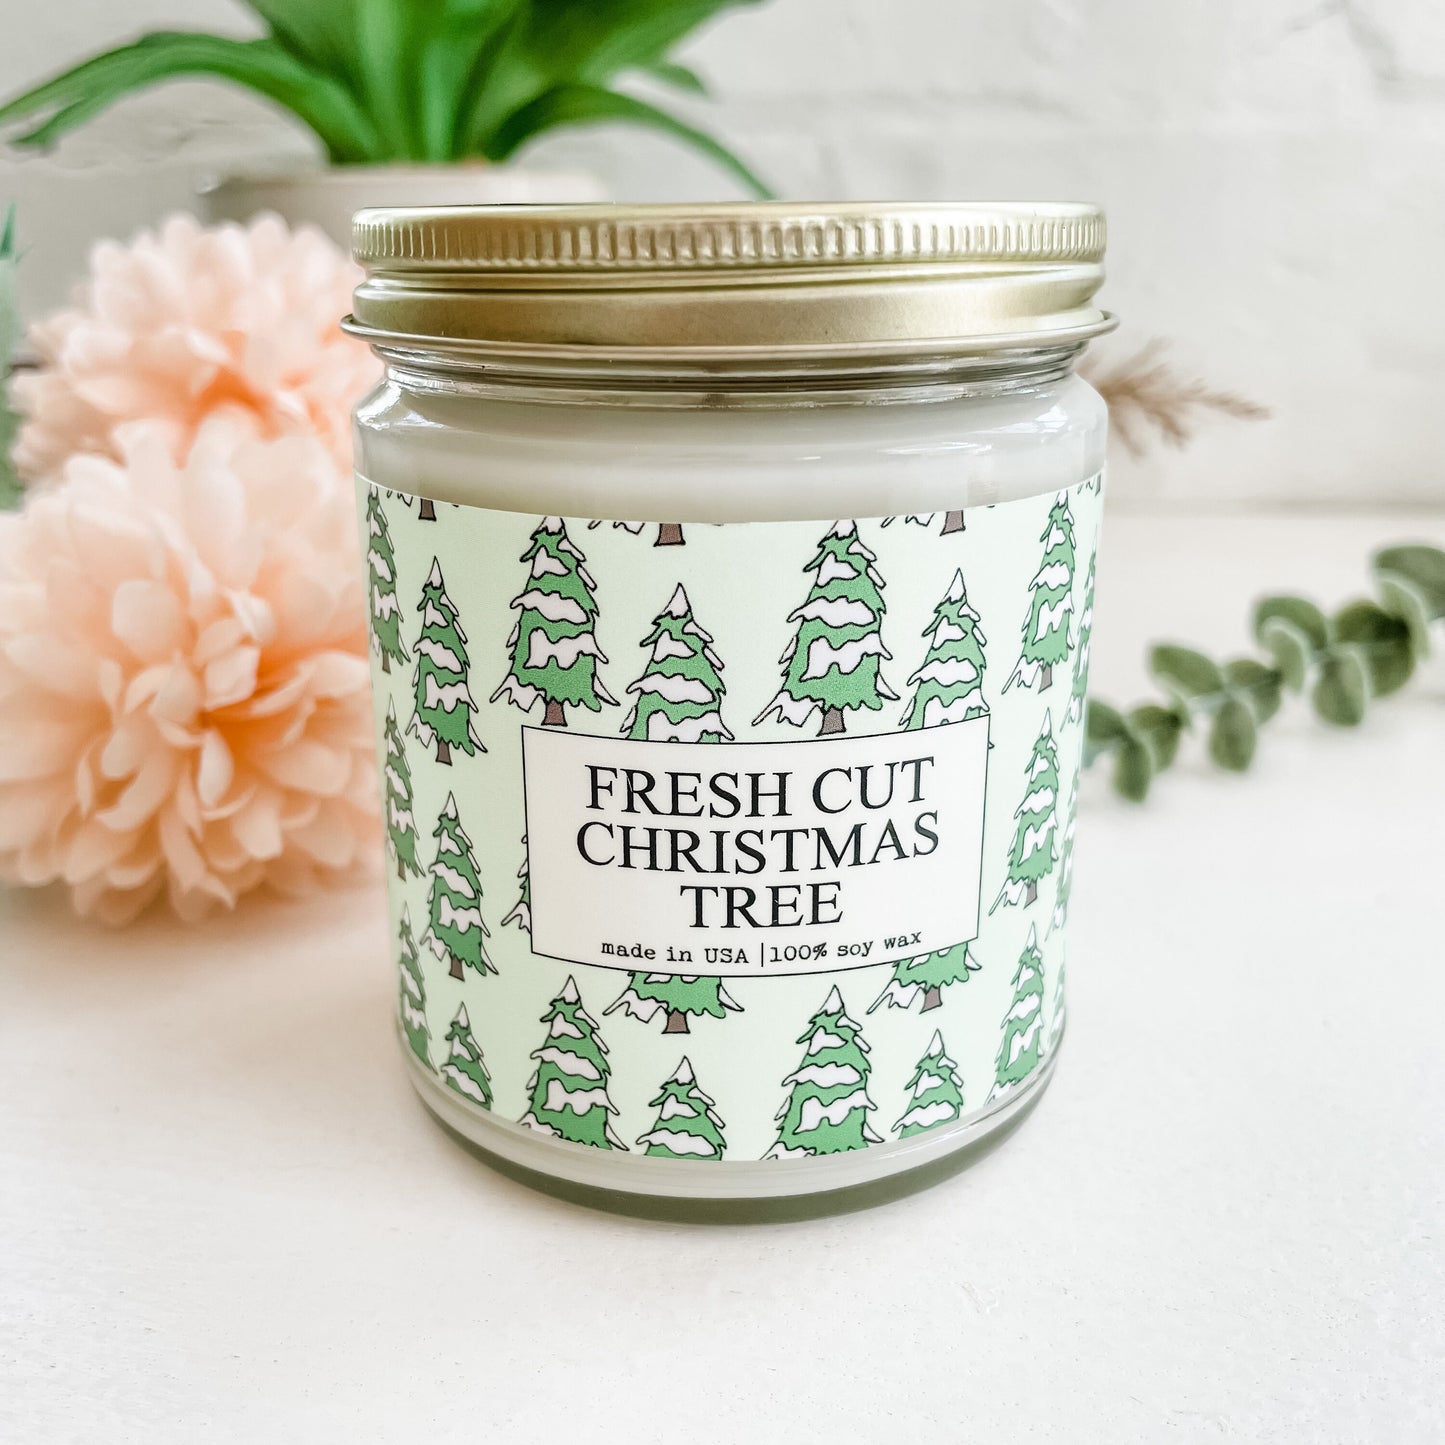 Fresh Cut Christmas Tree Scented Candle - 9oz Glass Jar Soy Candle - Christmas Candle